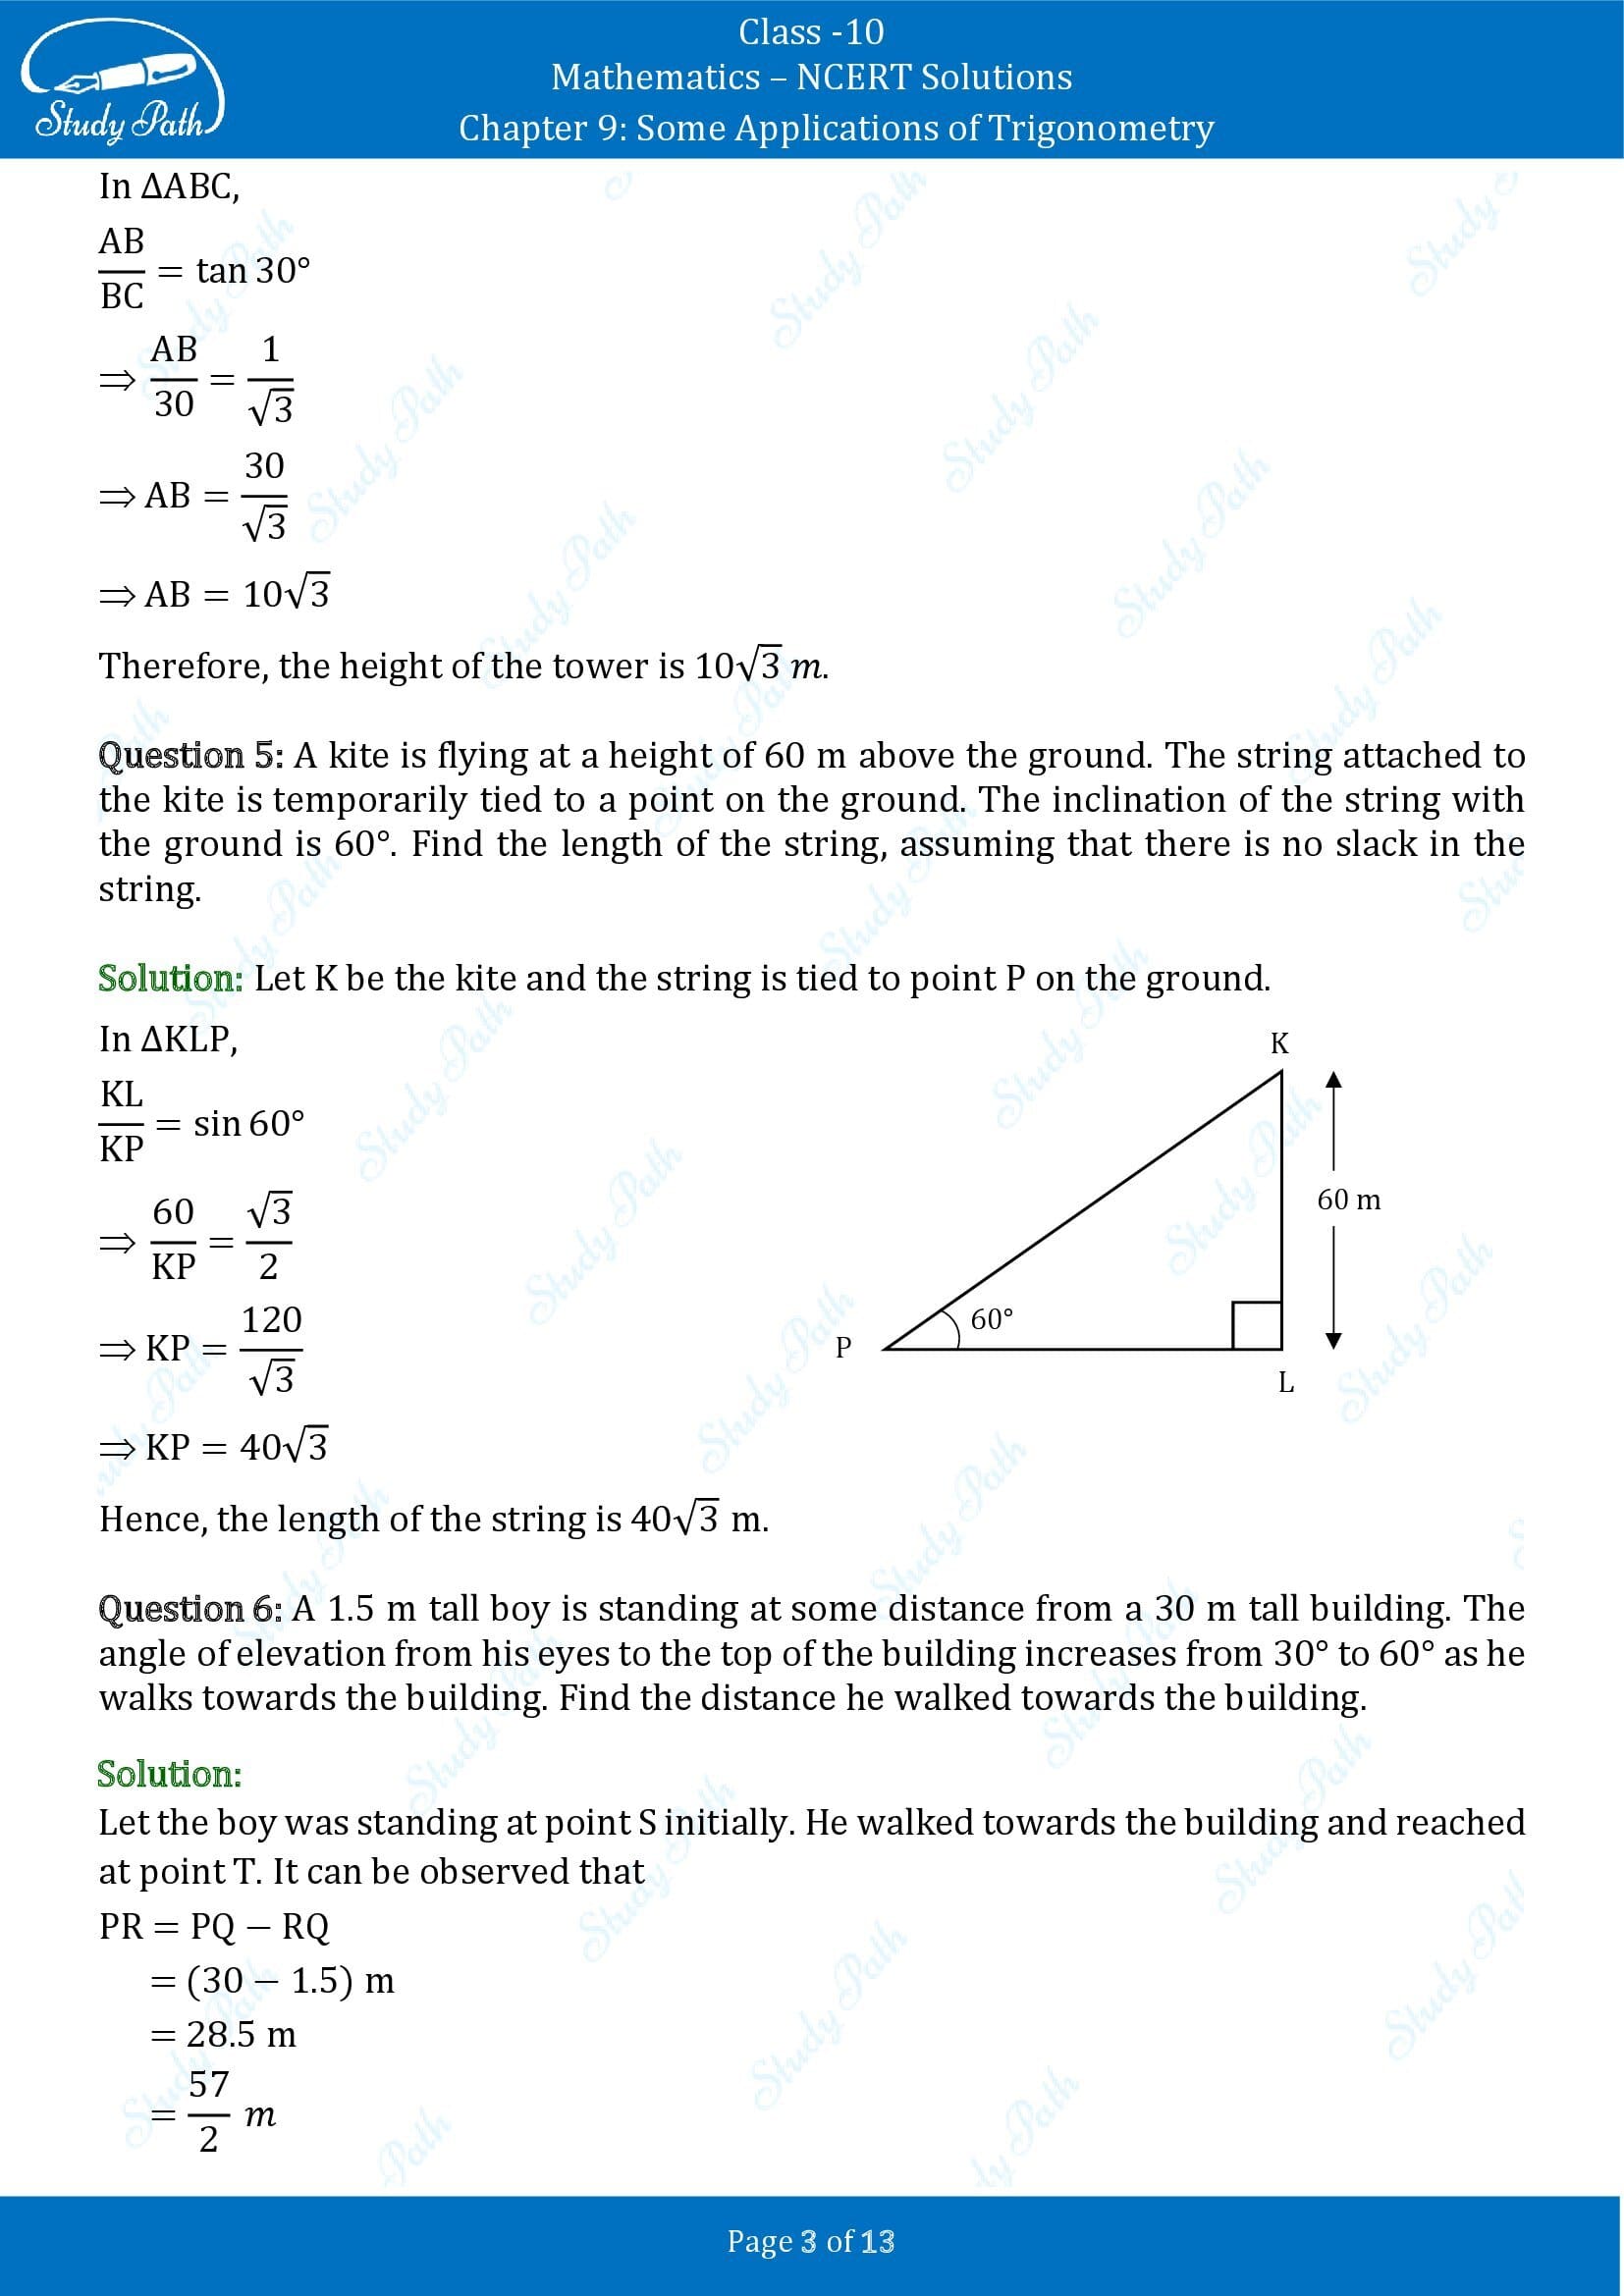 NCERT Solutions for Class 10 Maths Chapter 9 Some Applications of Trigonometry 00003